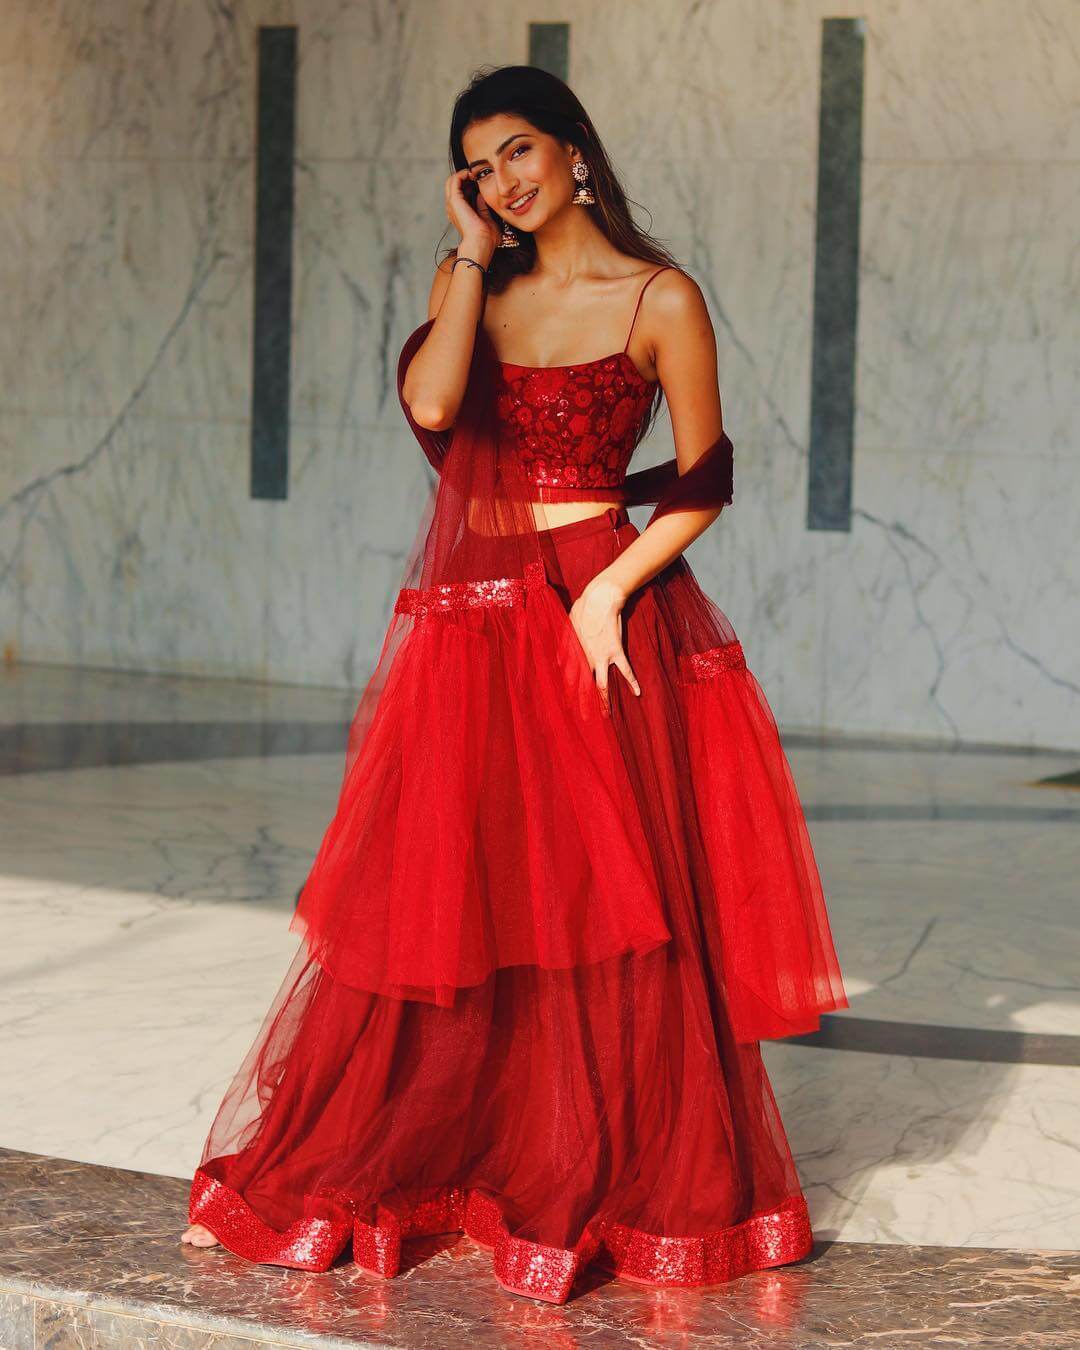 The Lady In Red Look Of Palak Tiwari